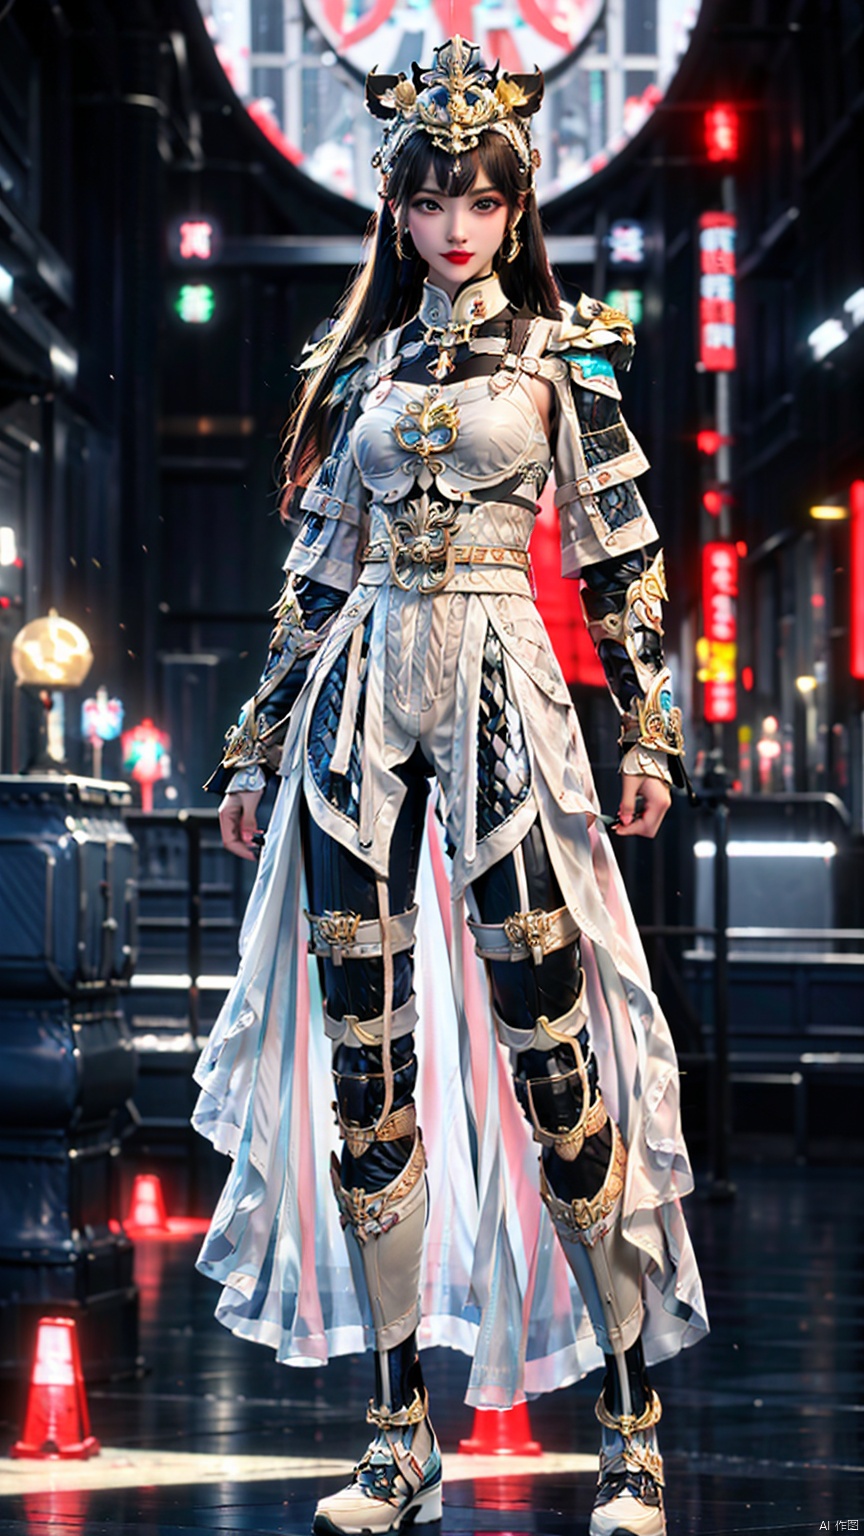 1 girl, solo, (upper body) female focal point, (blue eyes) (Hanfu) (kimono) (skin), long hair, () viewing audience) (Chinese armor) (armor) (red armor) (cloak) (hand guard) (shoulder guard) (armor mask) (dynamic posture),
(bright picture) red lips, bands, earings, print, tasks, (front view)
Tang Dynasty architecture, streets, nights, cyber colors.